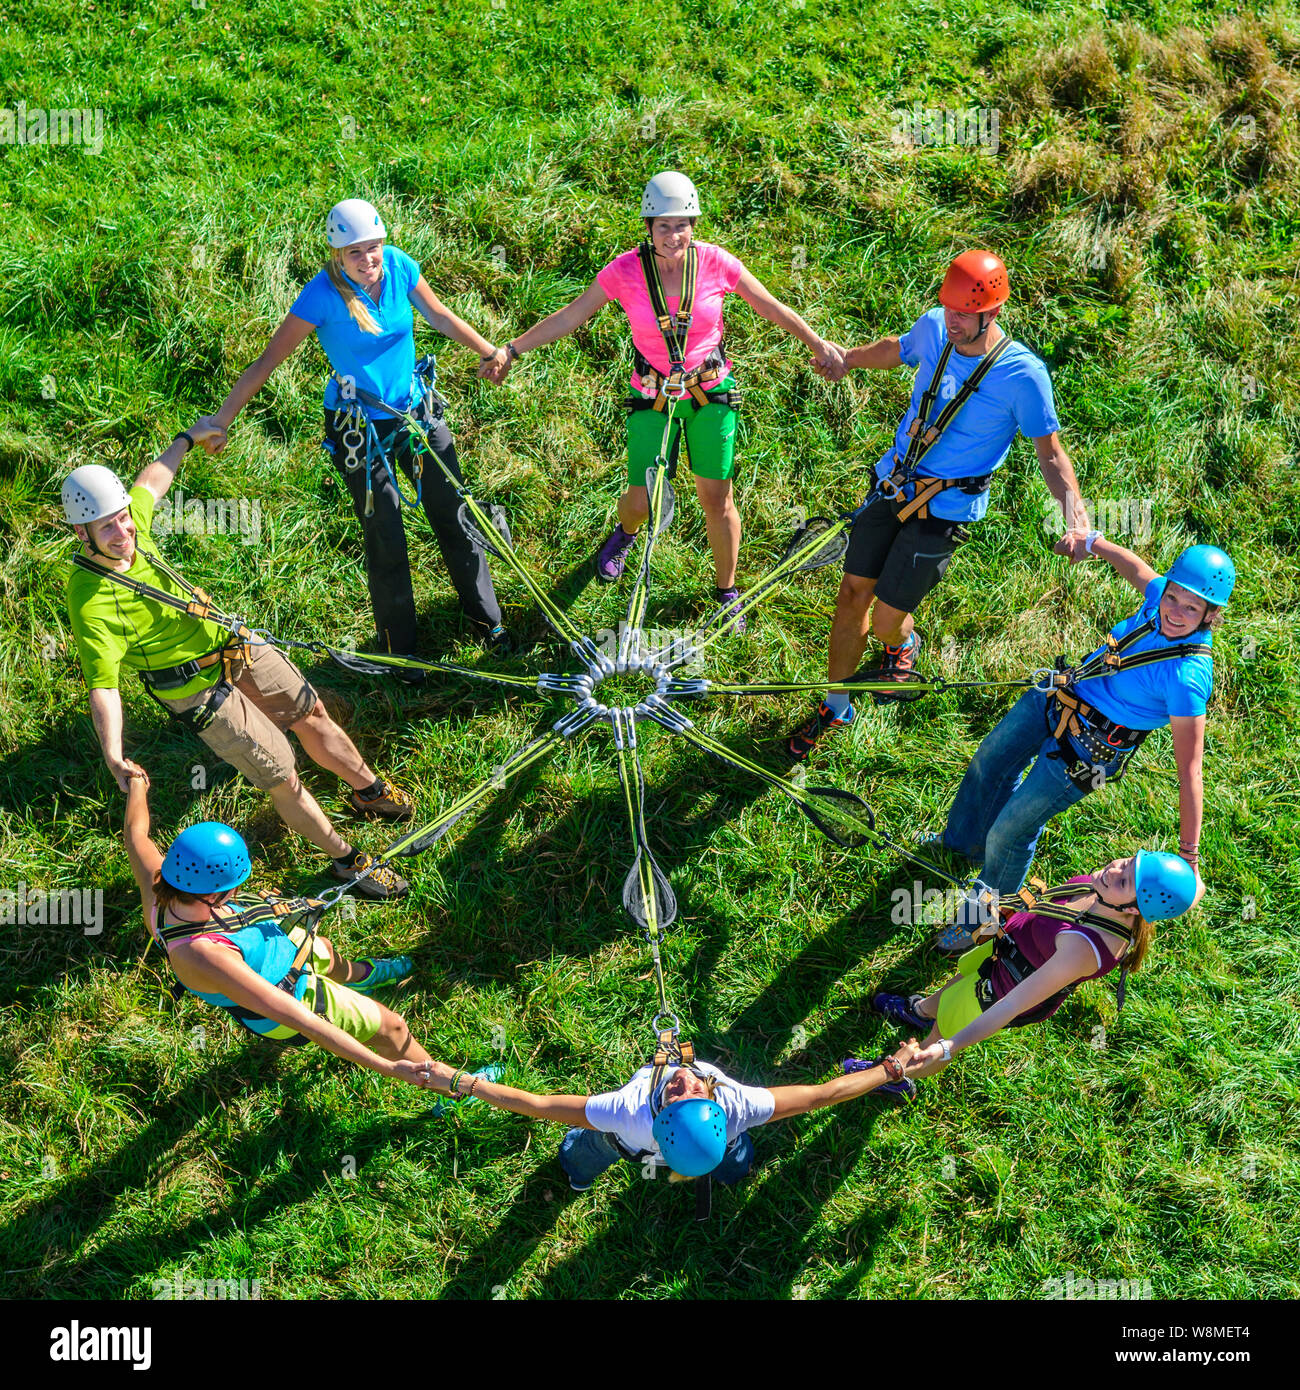 Group solidarity and team spirit in High Ropes Course Stock Photo